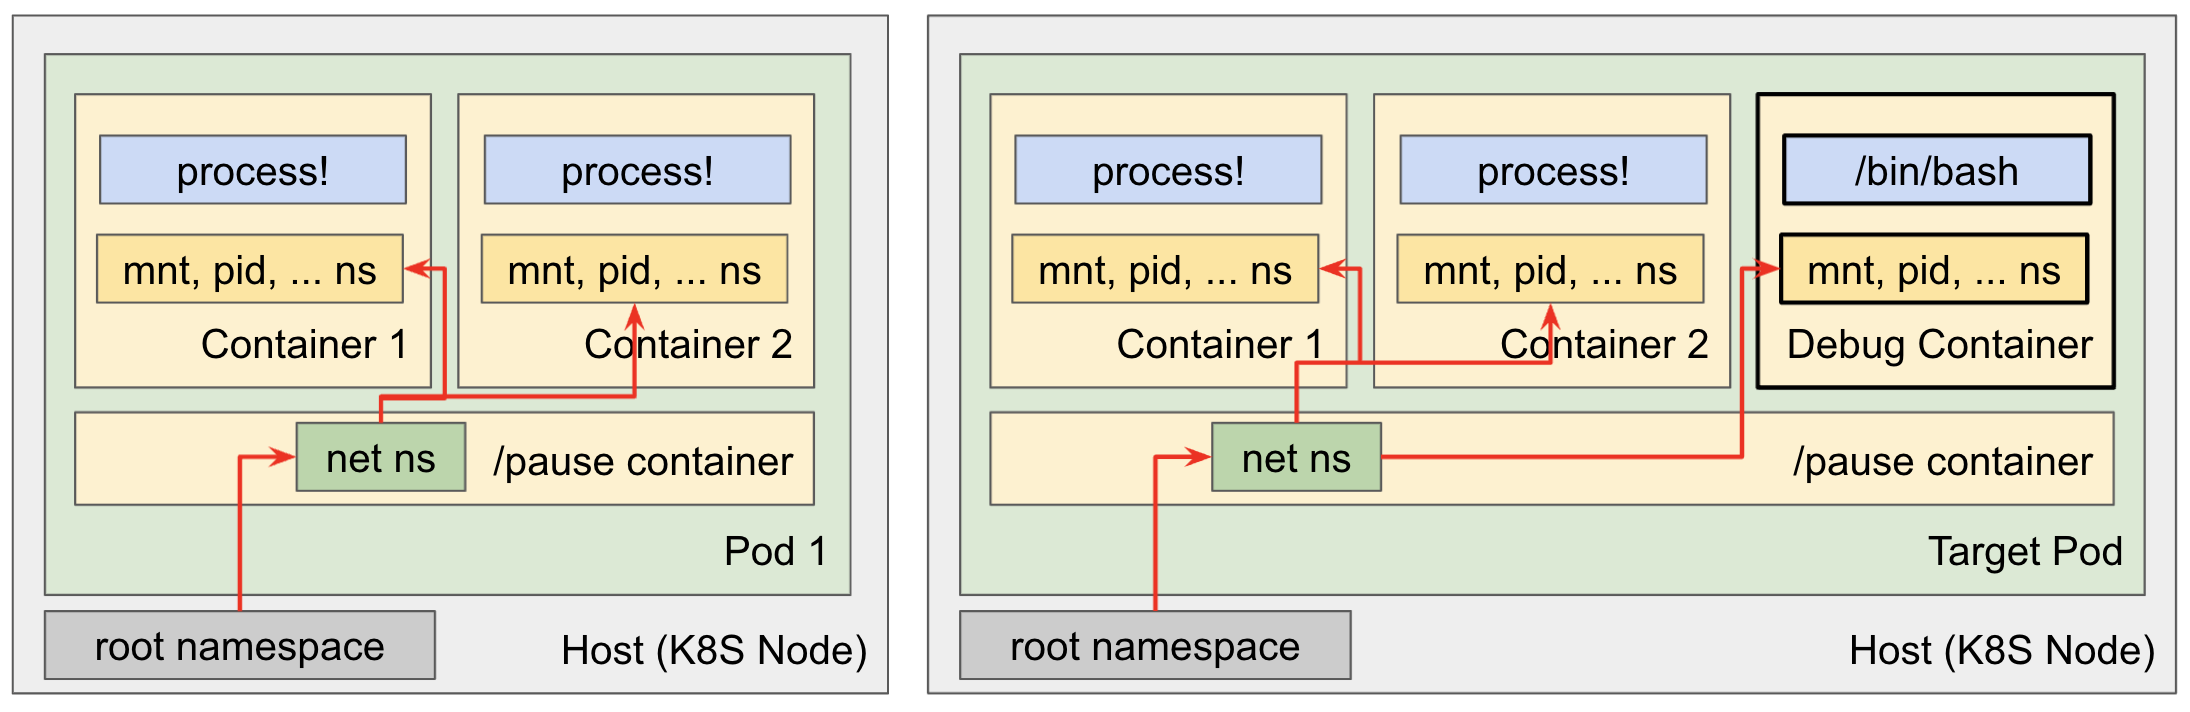 pod, container and namespace